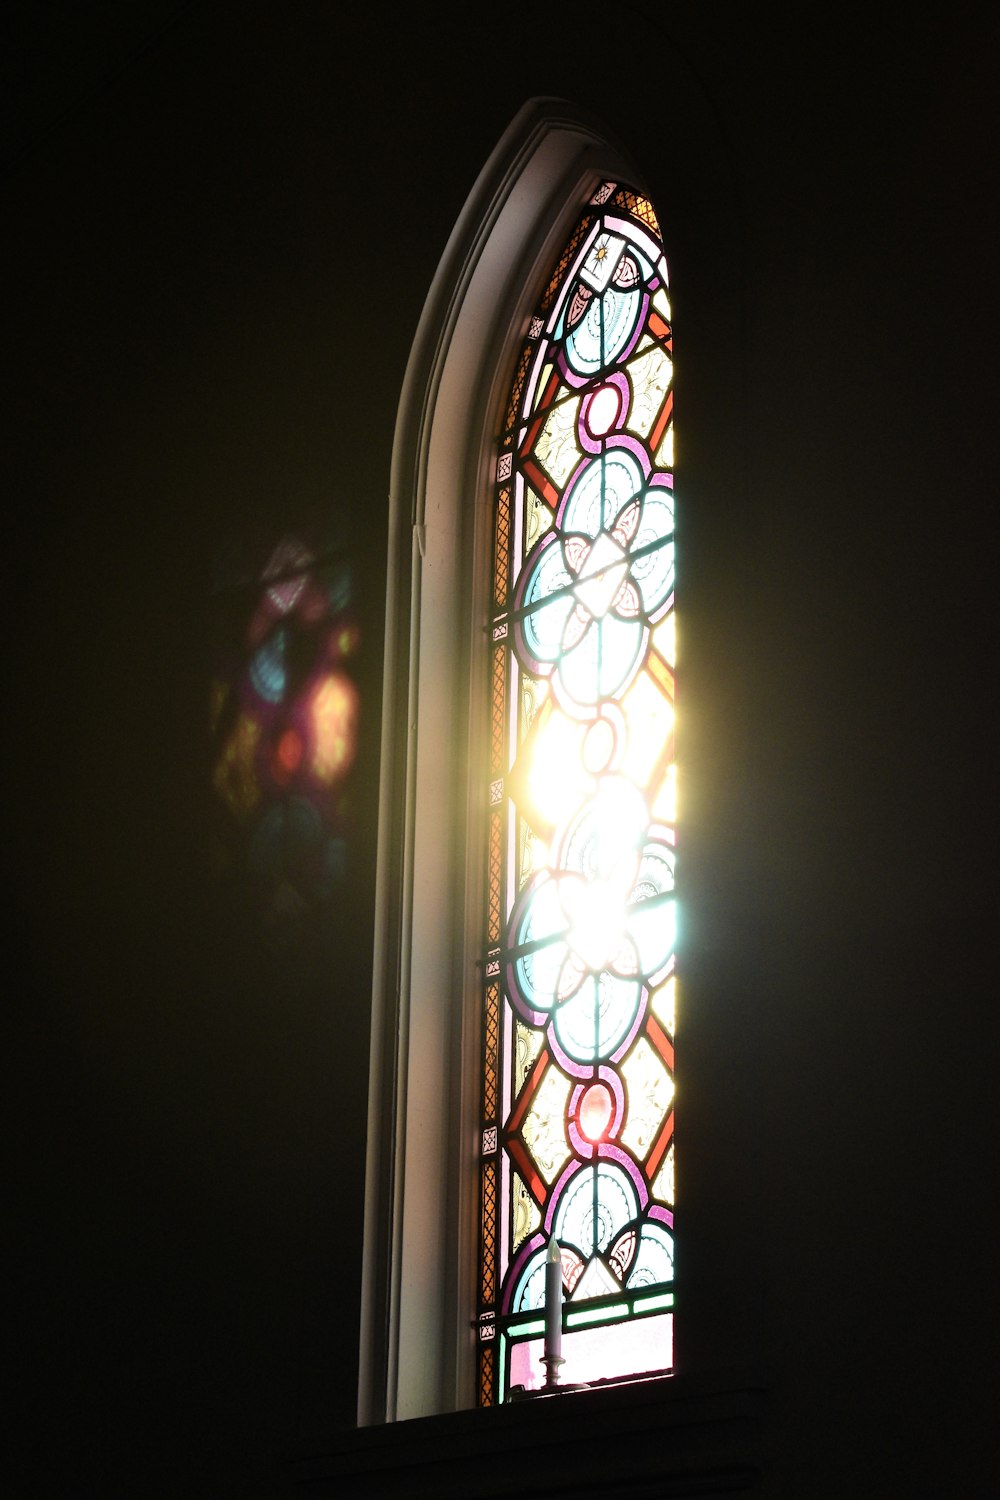 Stained Glass Window Pictures  Download Free Images on Unsplash